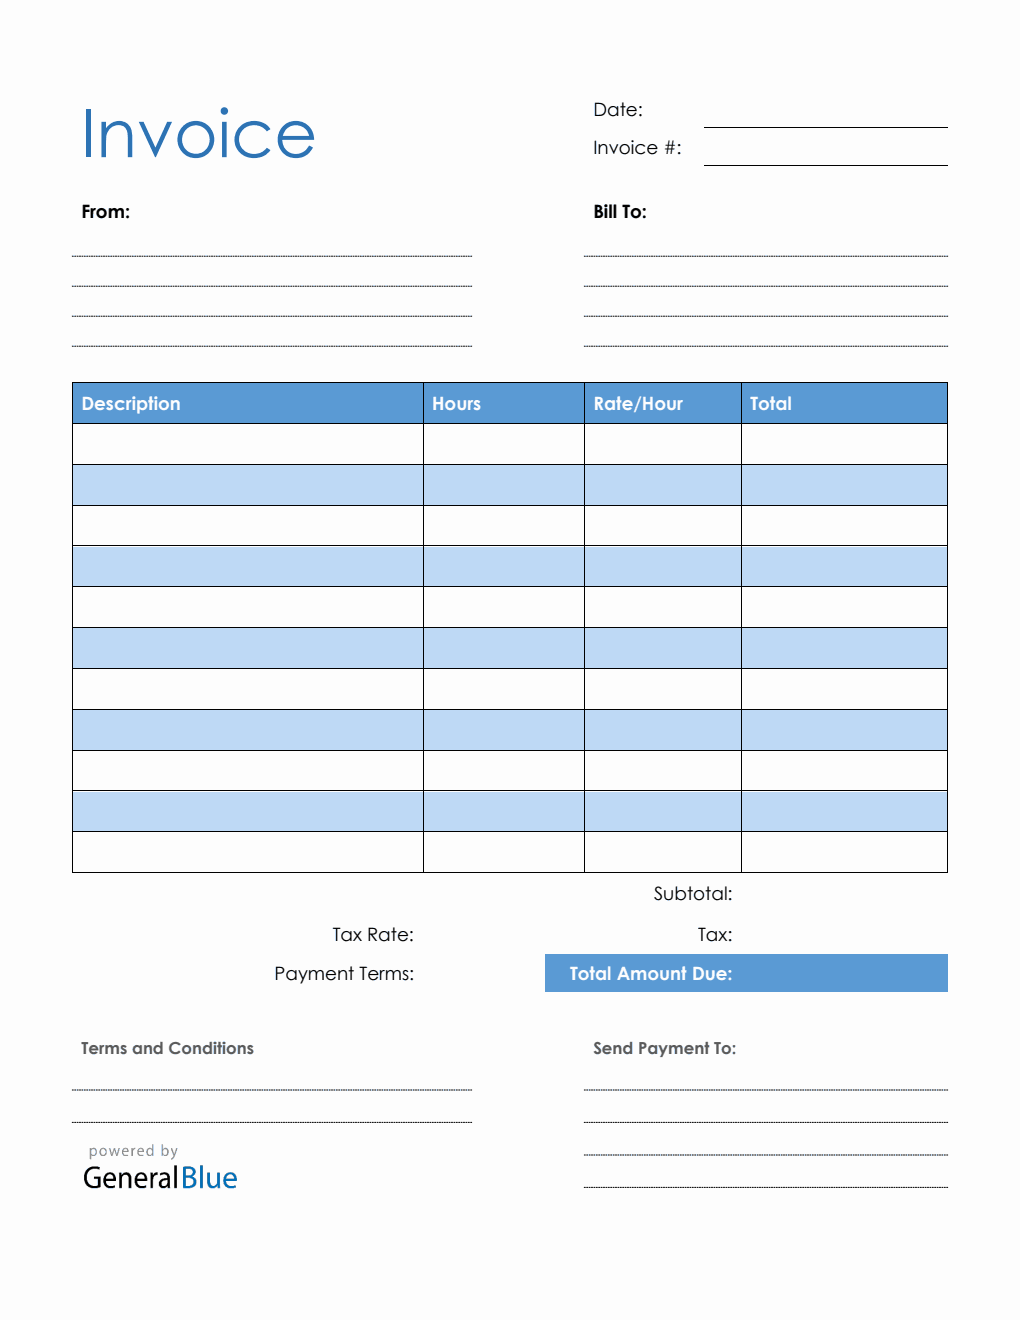 Blank Invoice Template in PDF Blue